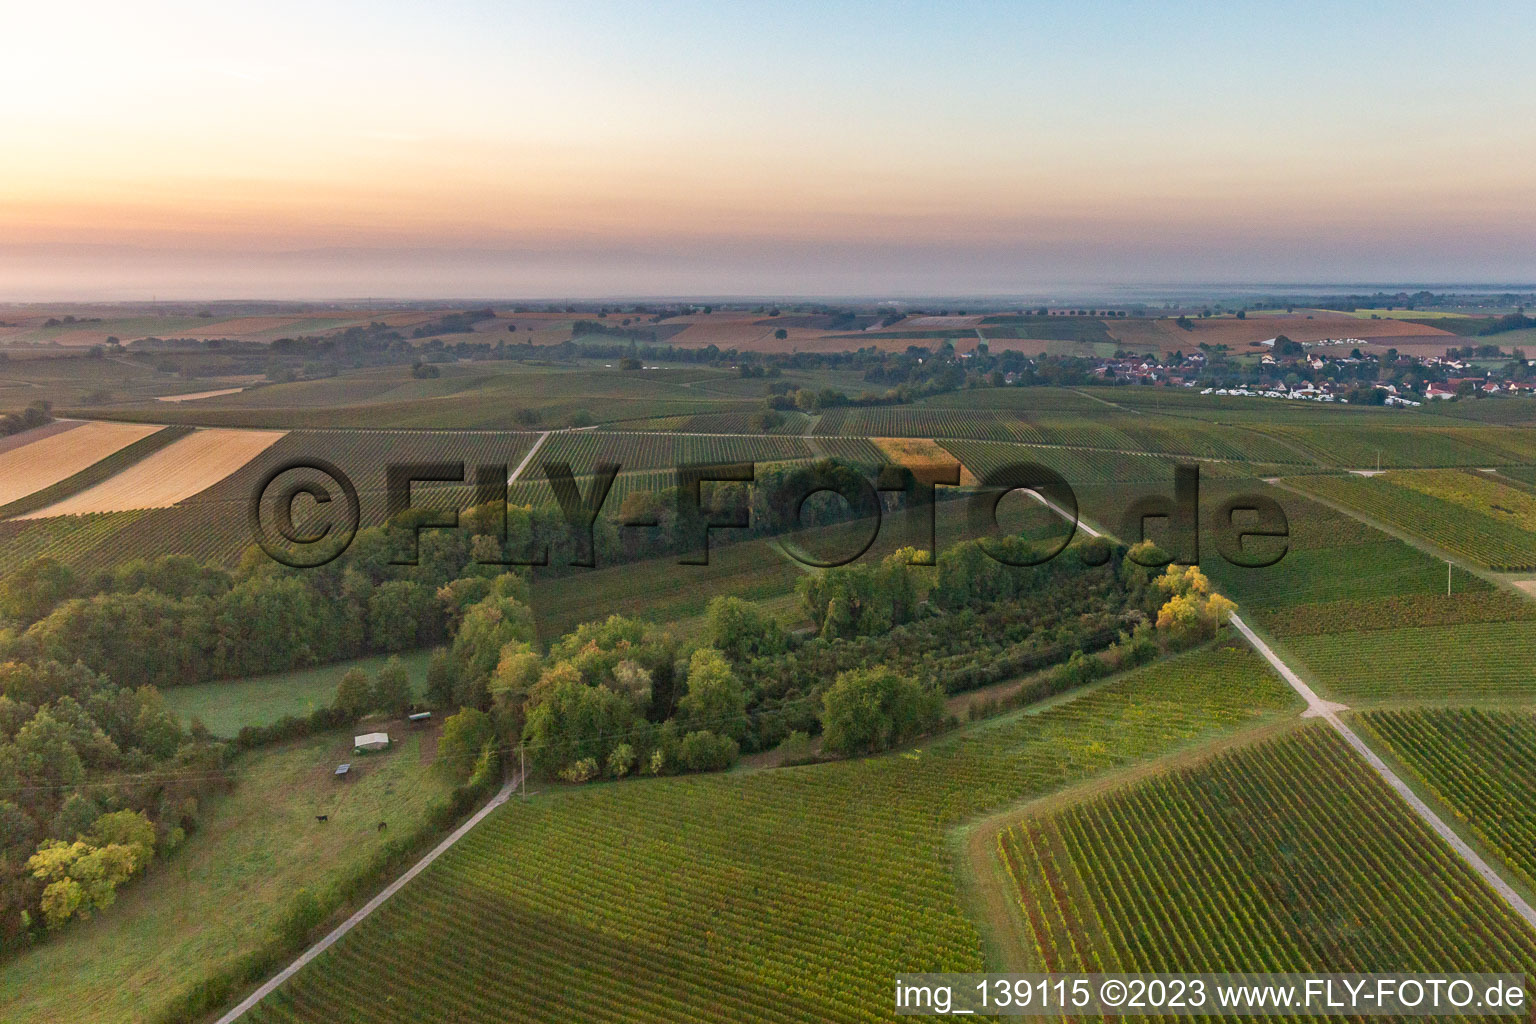 Aerial view of Barbelroth in the state Rhineland-Palatinate, Germany